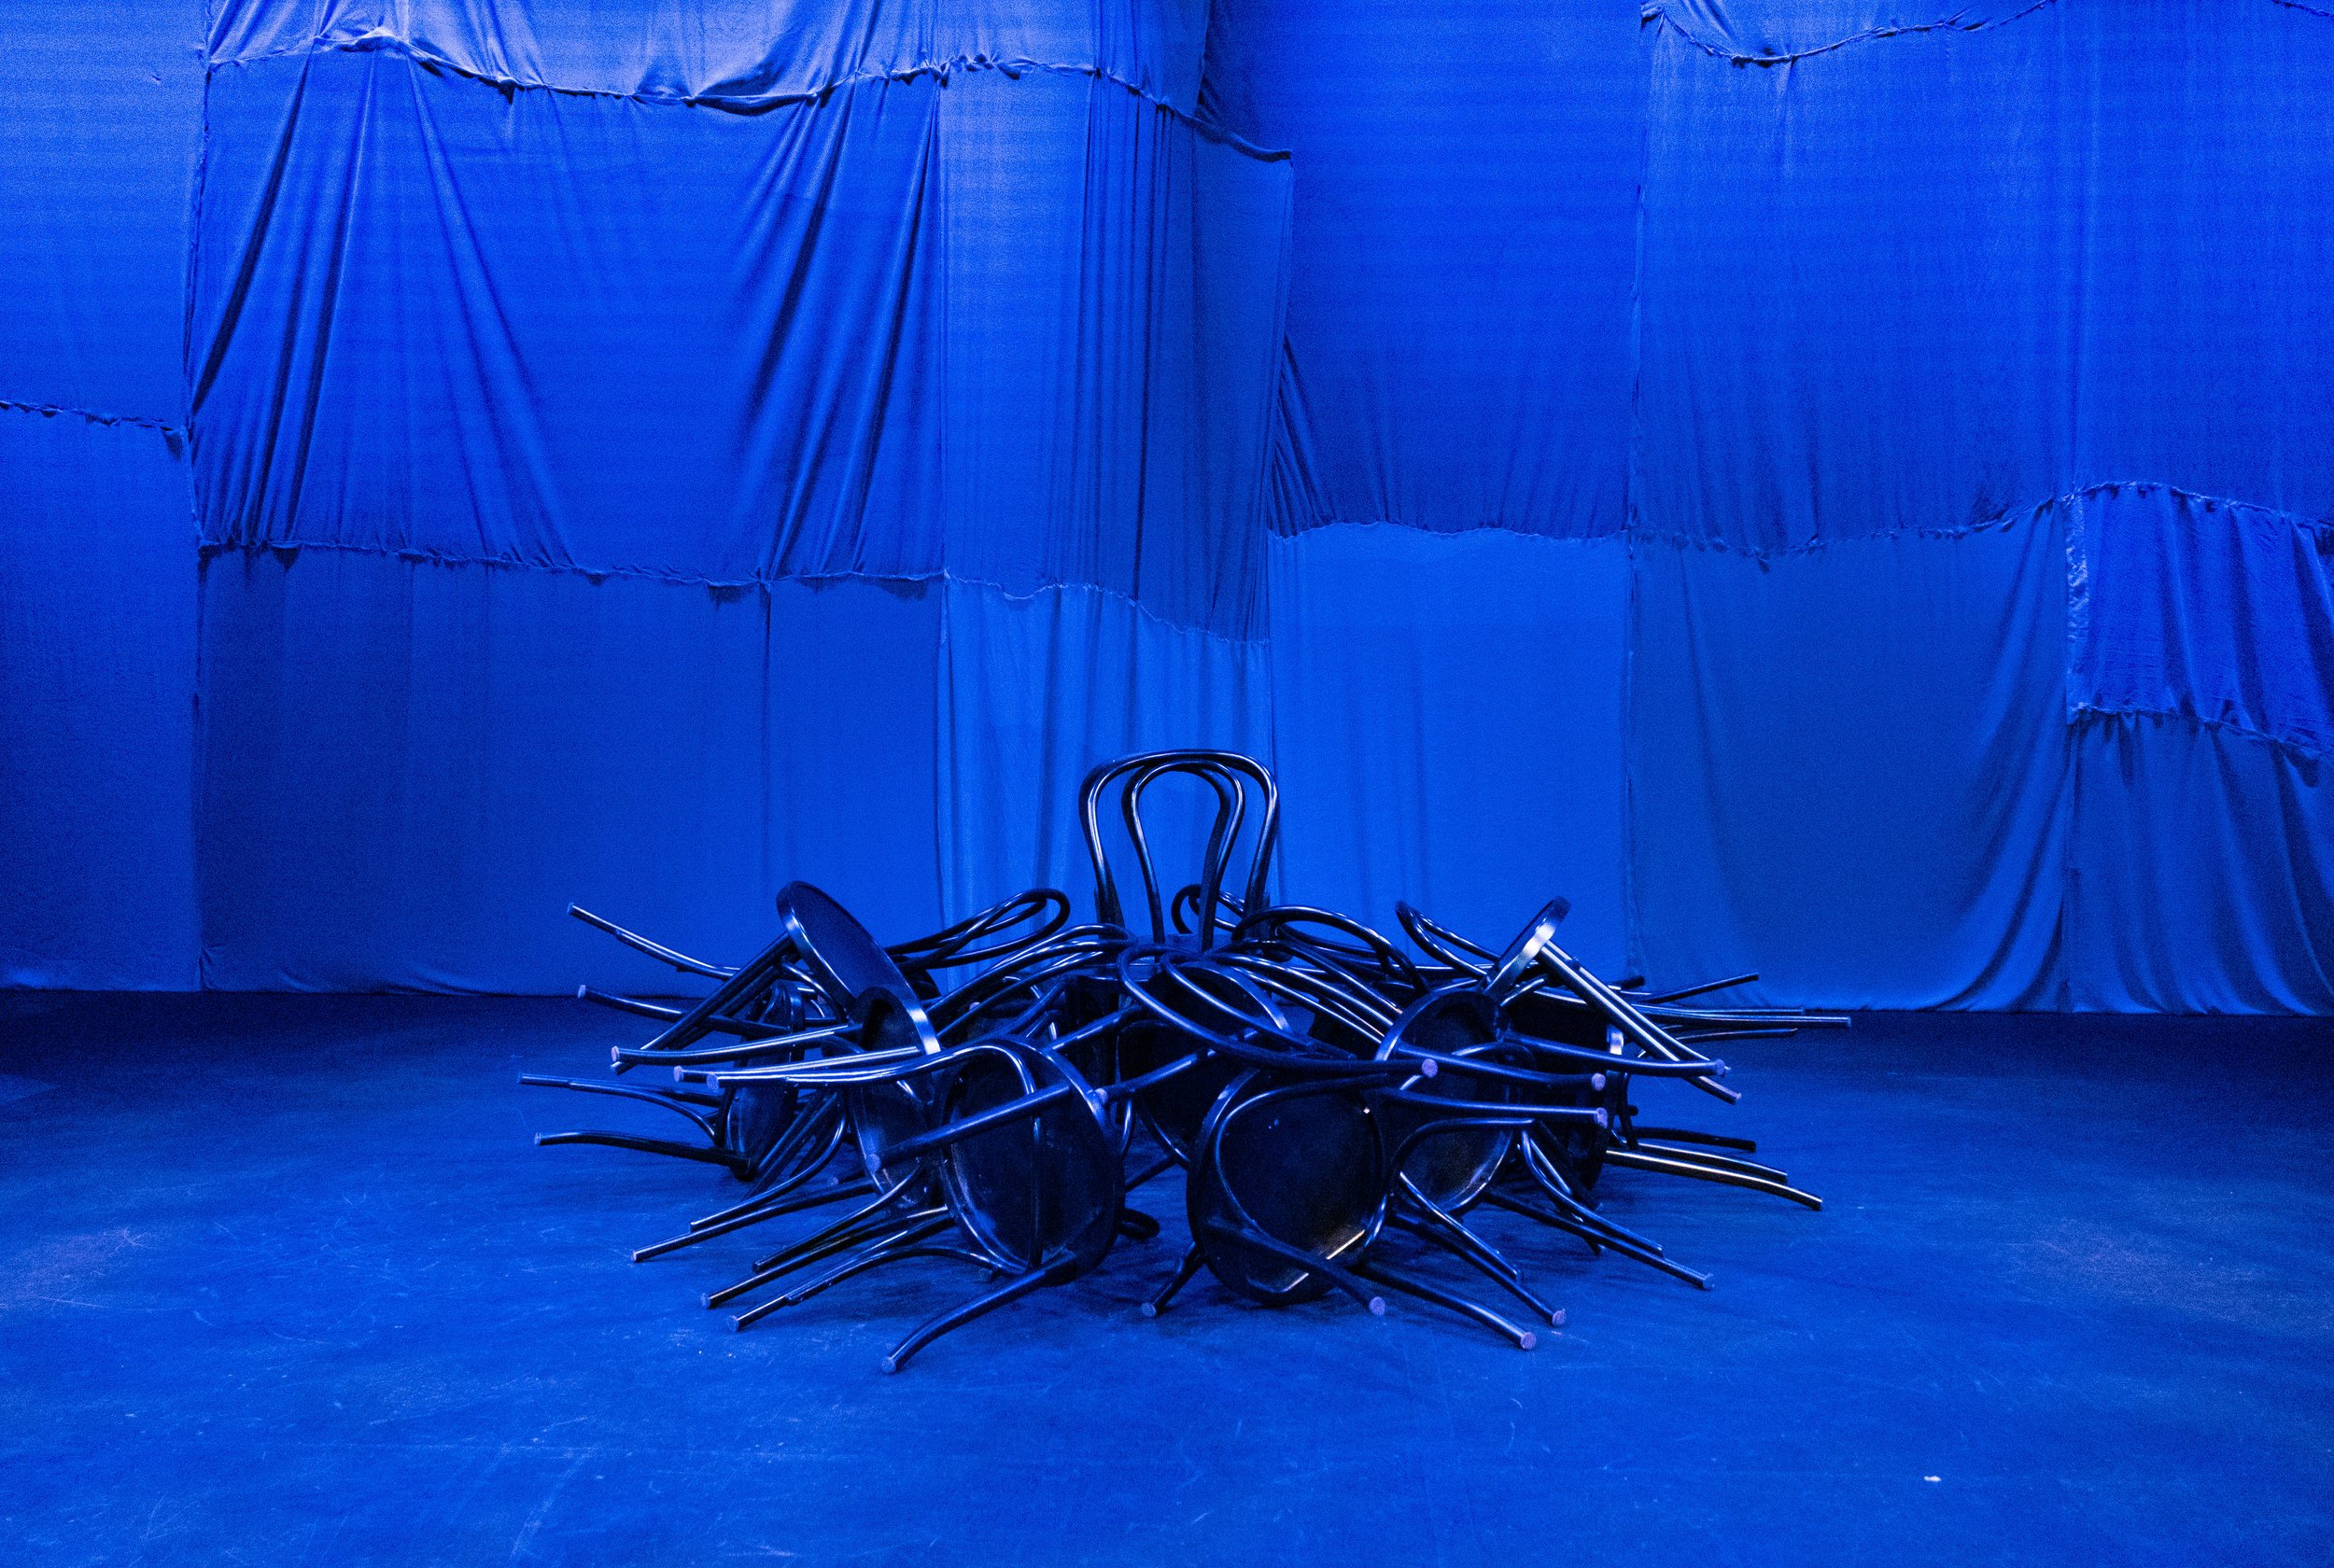  Before the stage reading of War Words, array of chairs lie down on the stage except for one. War Words is a play written by Michelle Kholos Brooks and is part of a national initiative to honor veterans through theatrical storytelling. The play was i